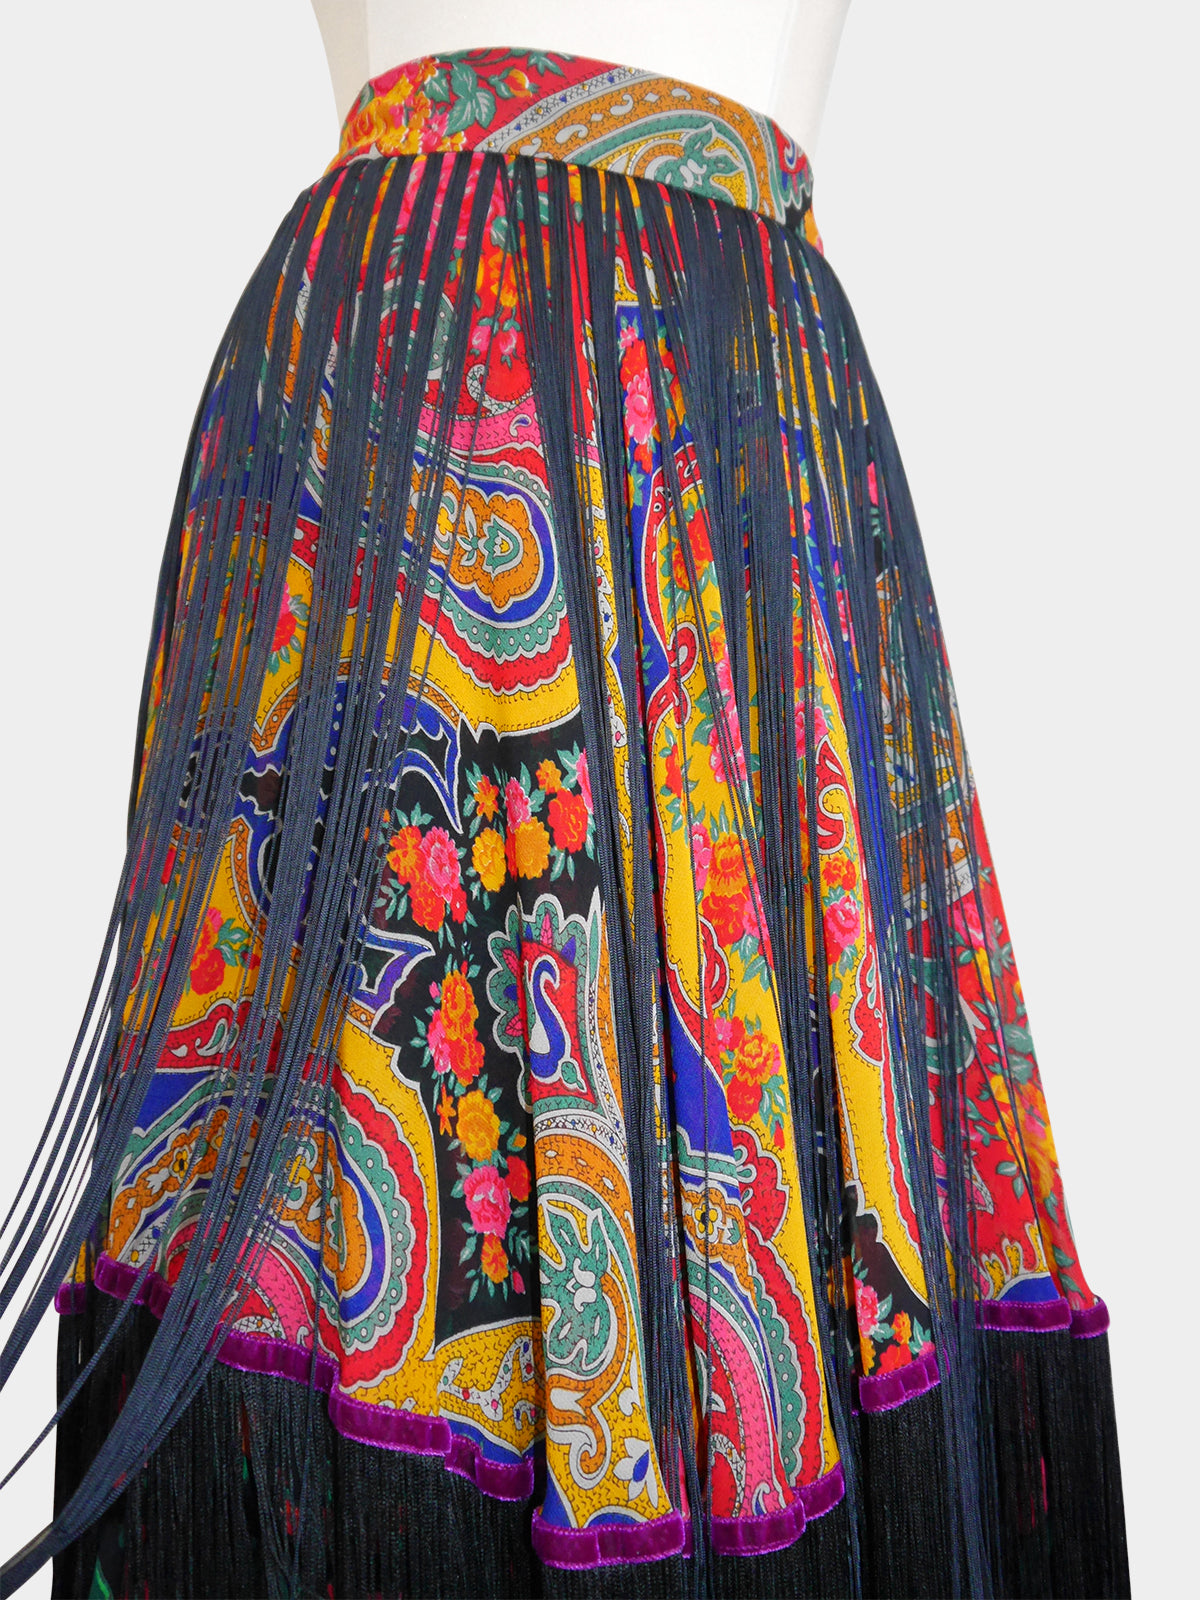 DOLCE & GABBANA Fall 1993 Vintage Fringed Tiered Hippie Peasant Maxi Skirt Size S-M